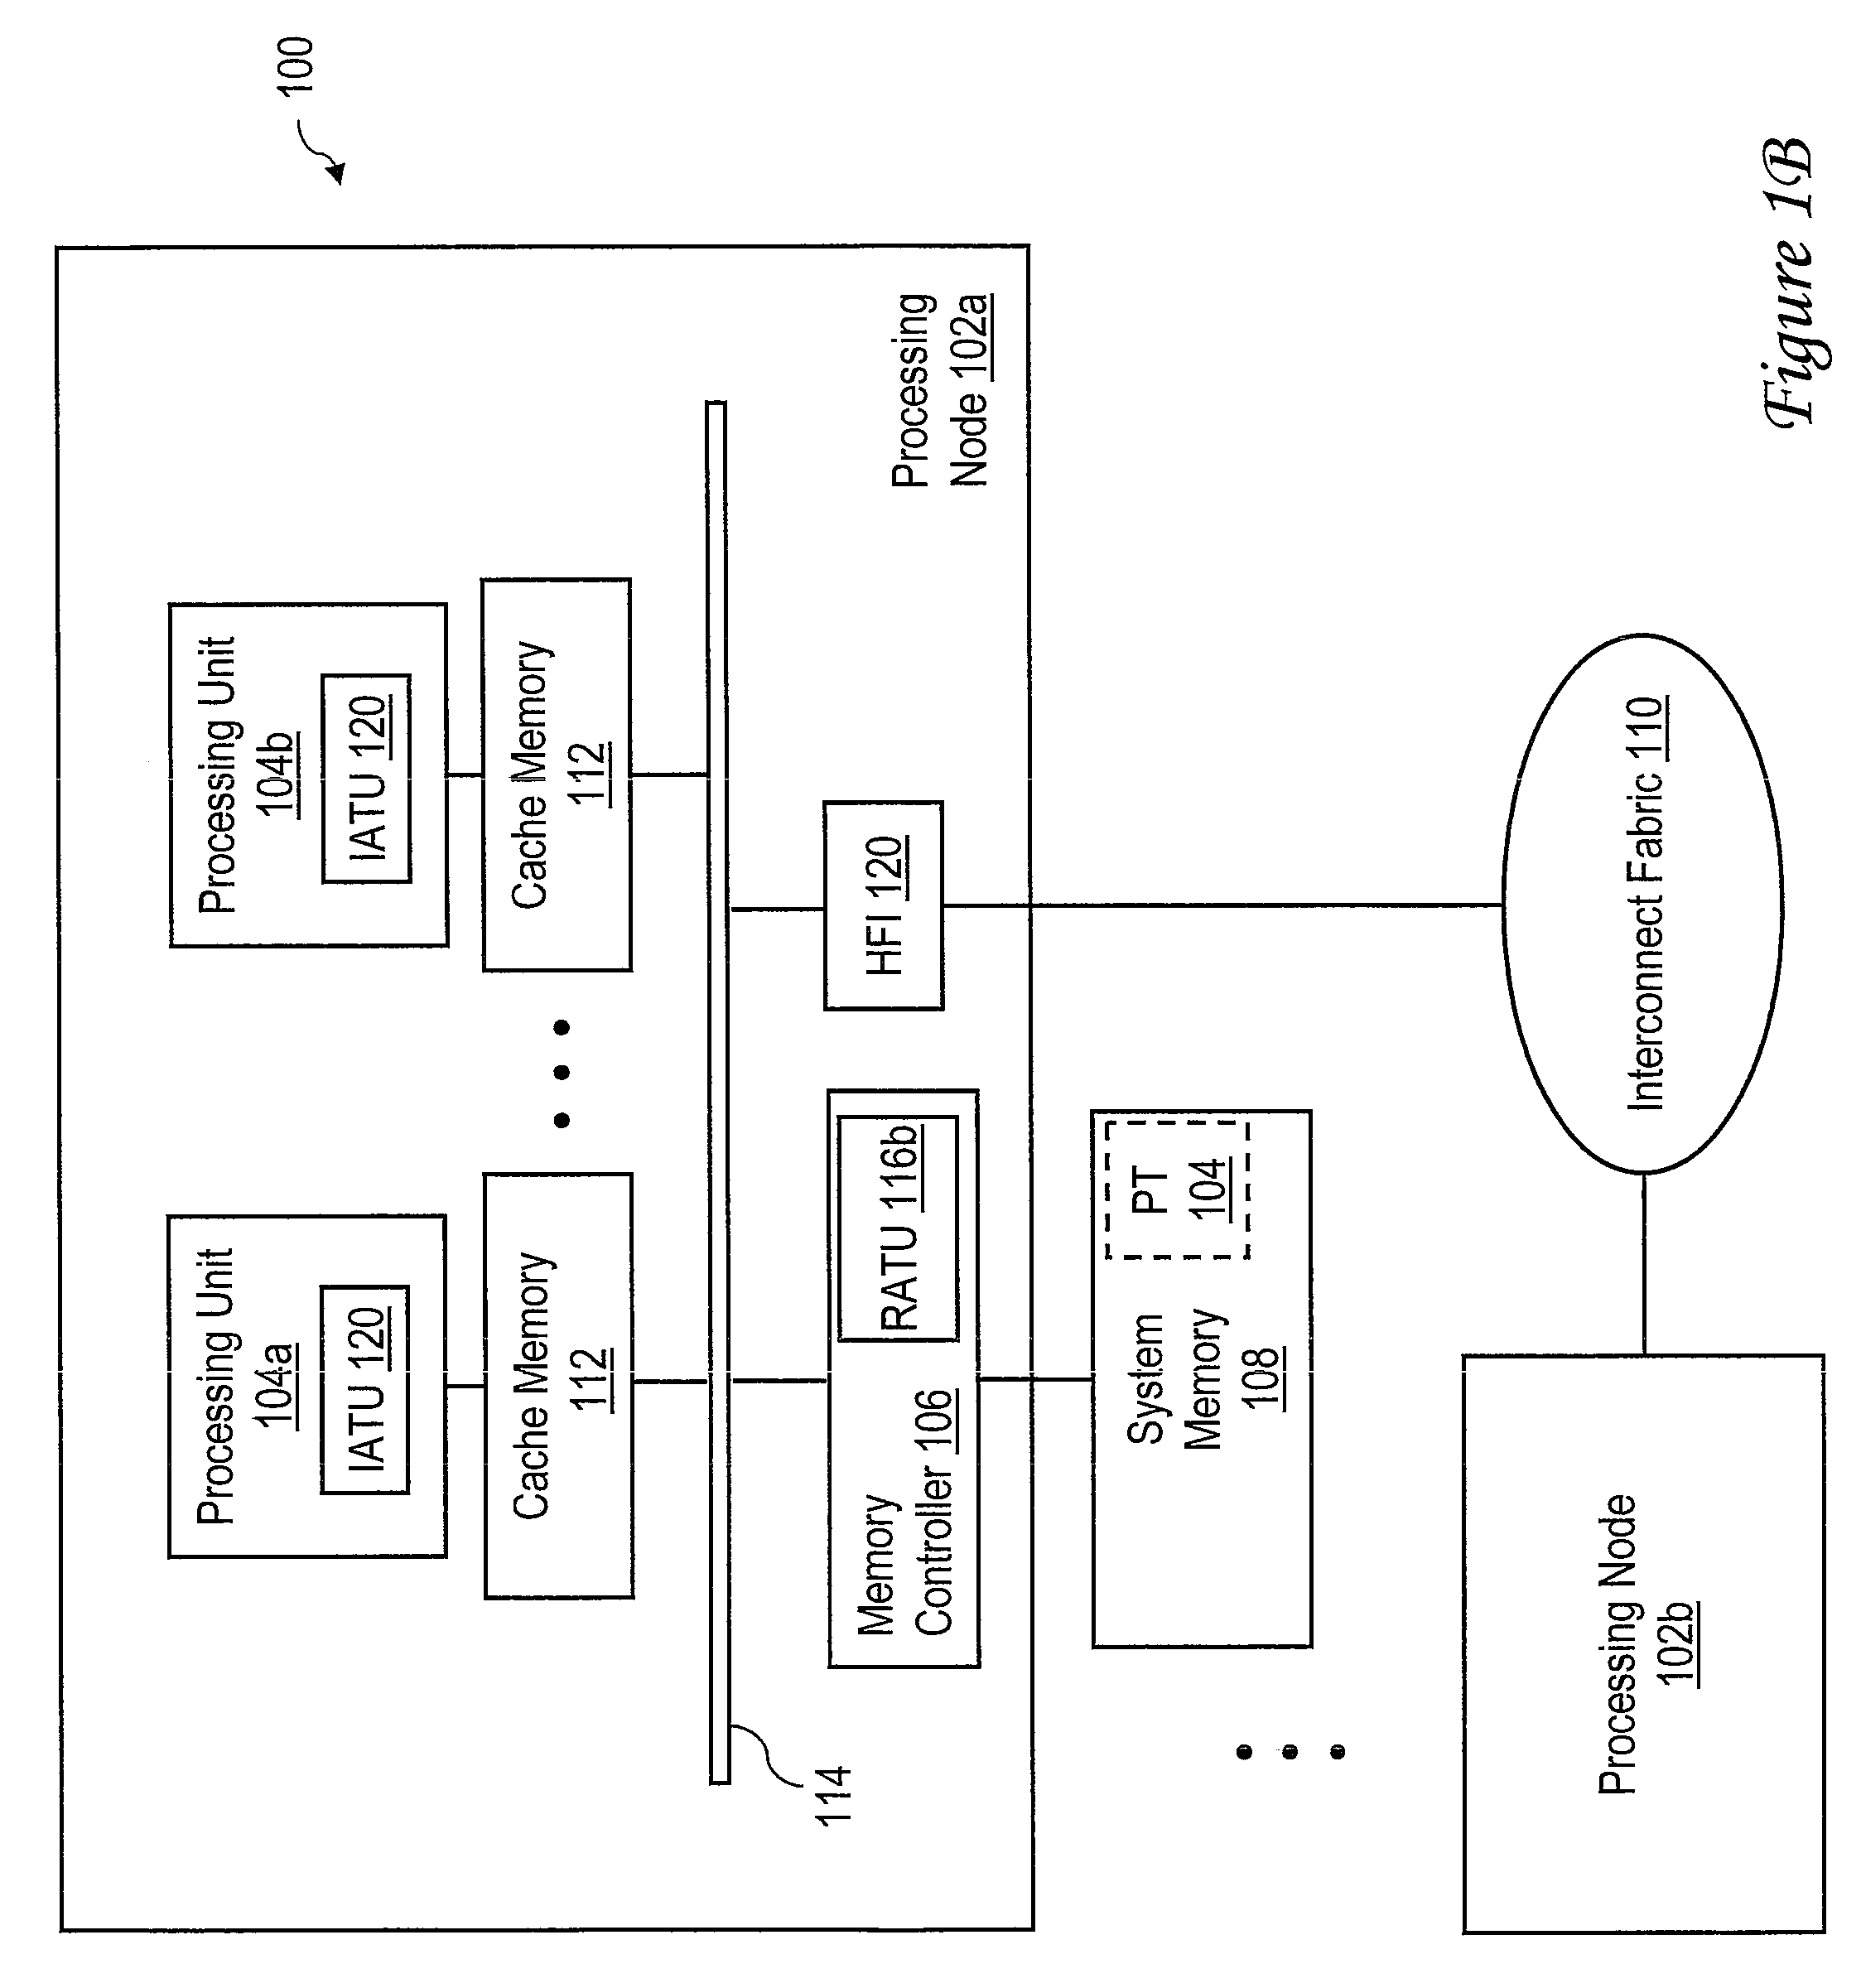 Method, System and Program Product for Address Translation Through an Intermediate Address Space